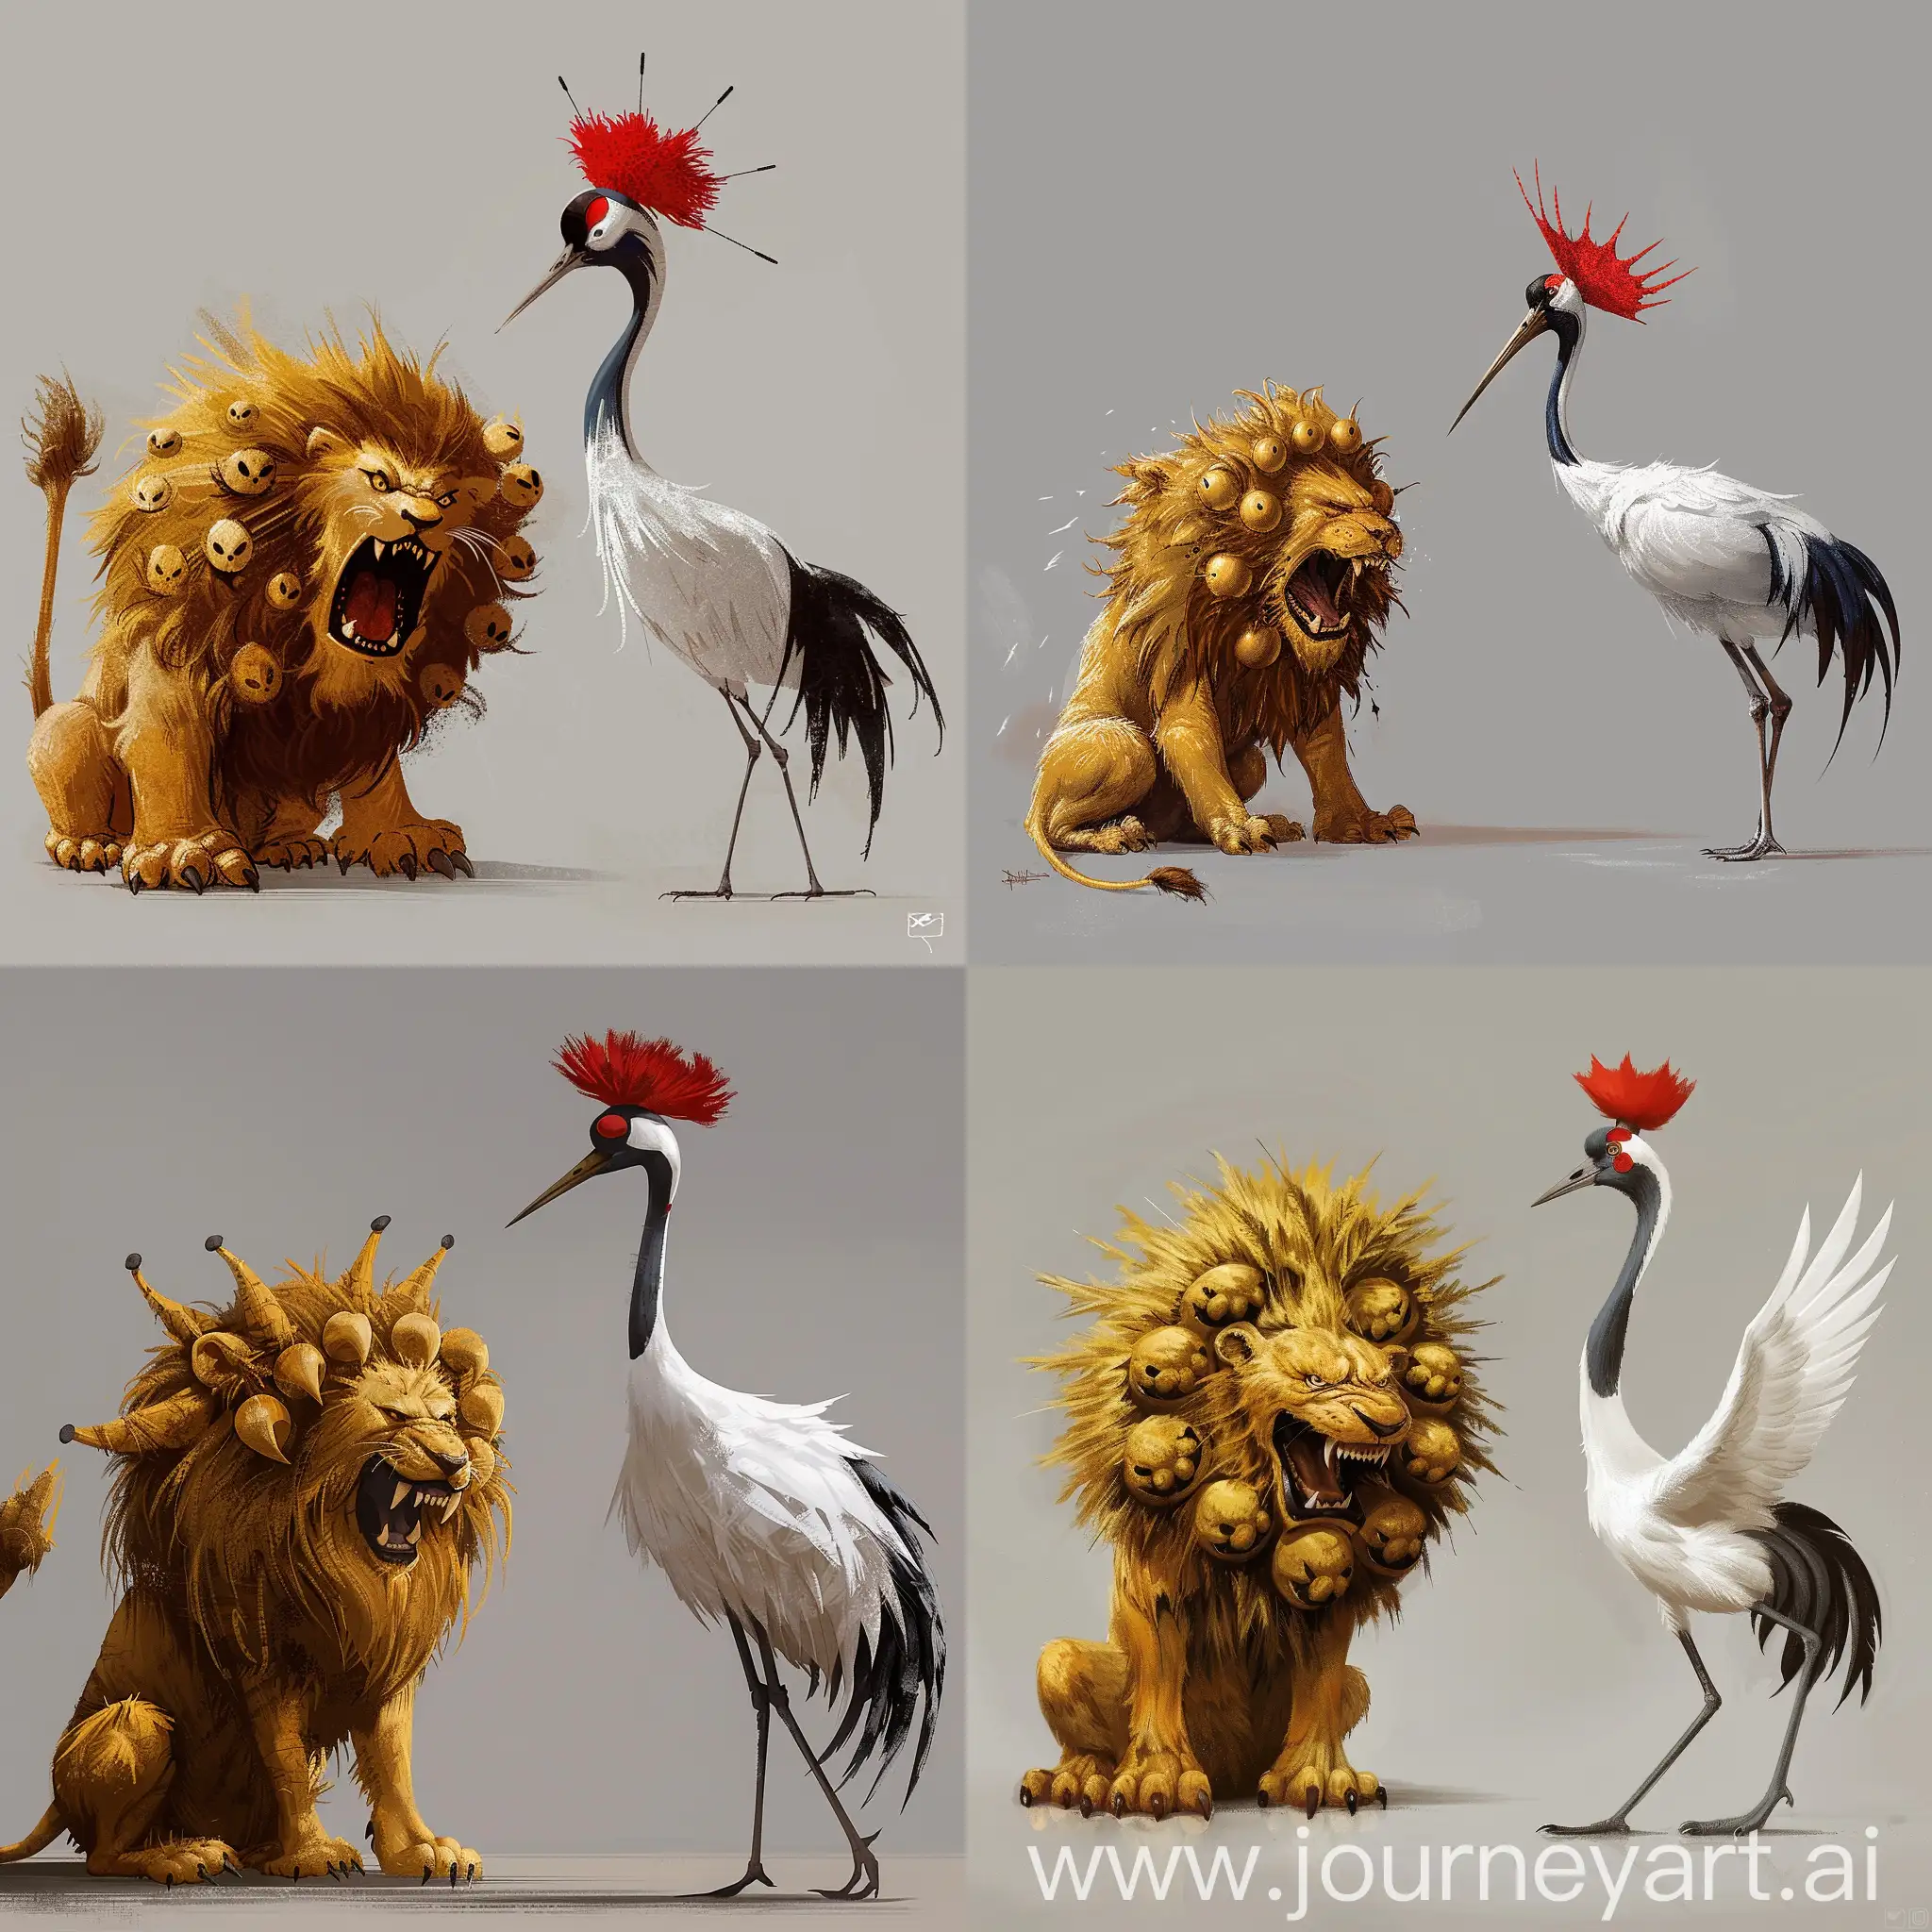 Furious-NineHeaded-Lion-Confronts-RedCrowned-Crane-in-Gray-Background